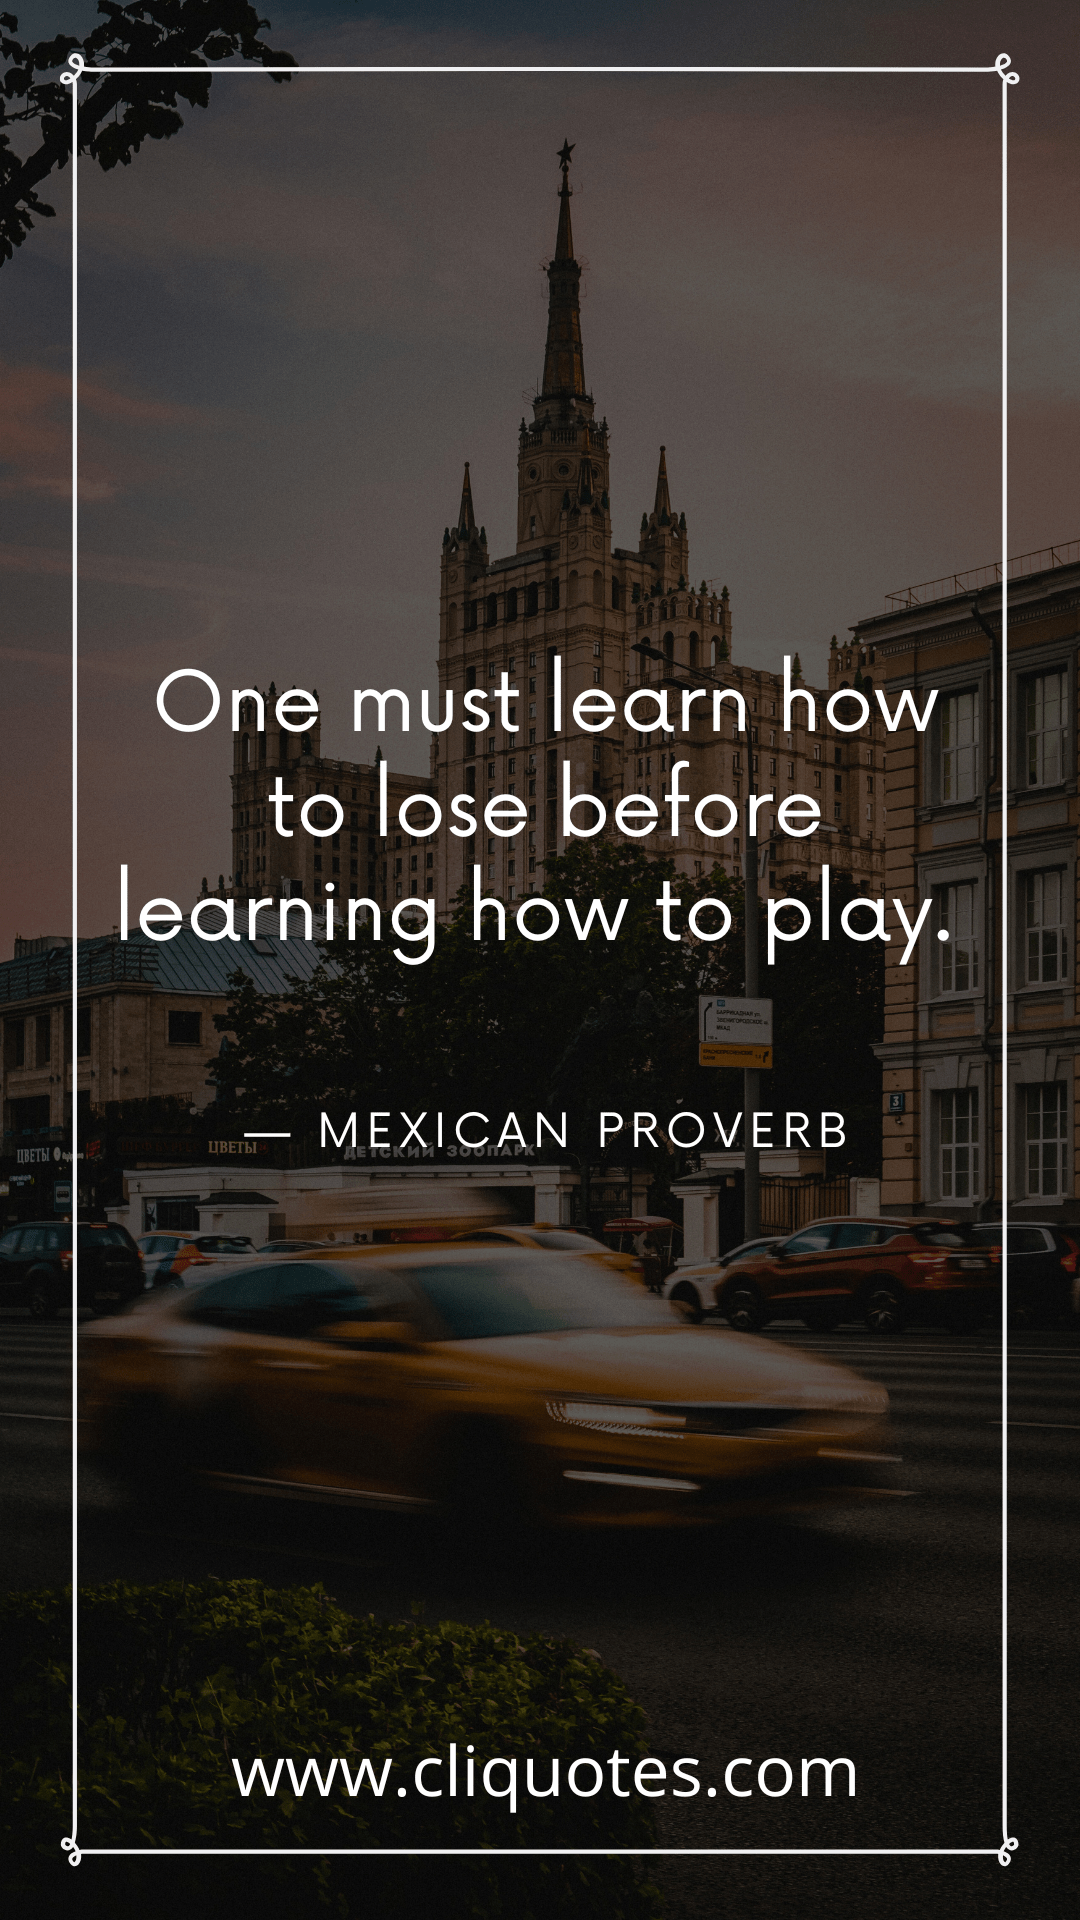 One must learn how to lose before learning how to play. — MEXICAN PROVERB